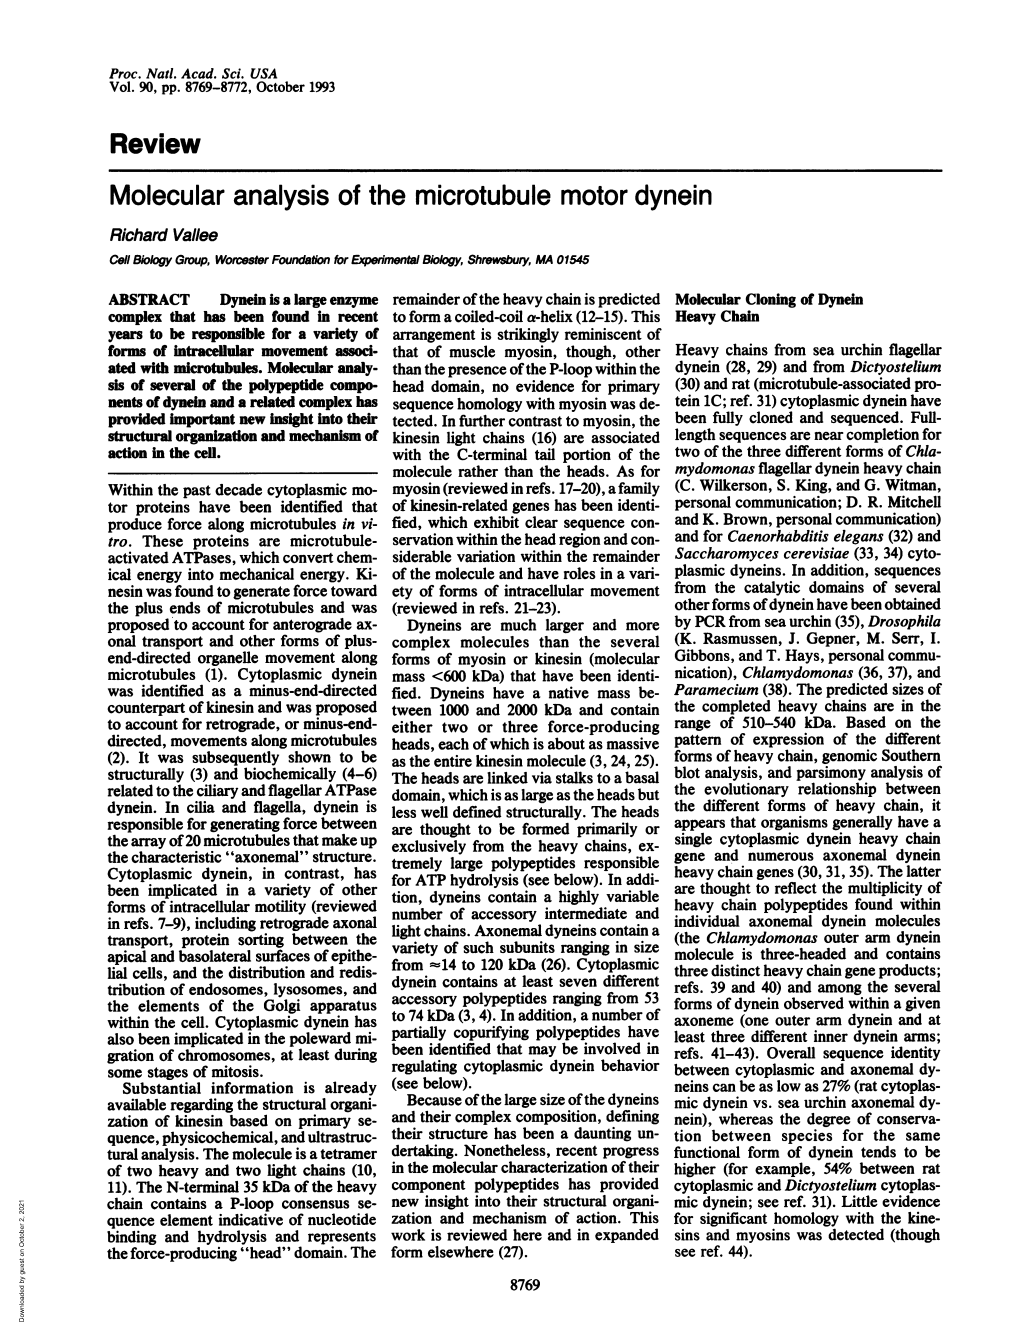 Review Molecular Analysis of the Microtubule Motor Dynein Richard Vallee Cell Biology Group, Worcester Foundaton for Eerimental Biology, Shrwsury, MA 01545